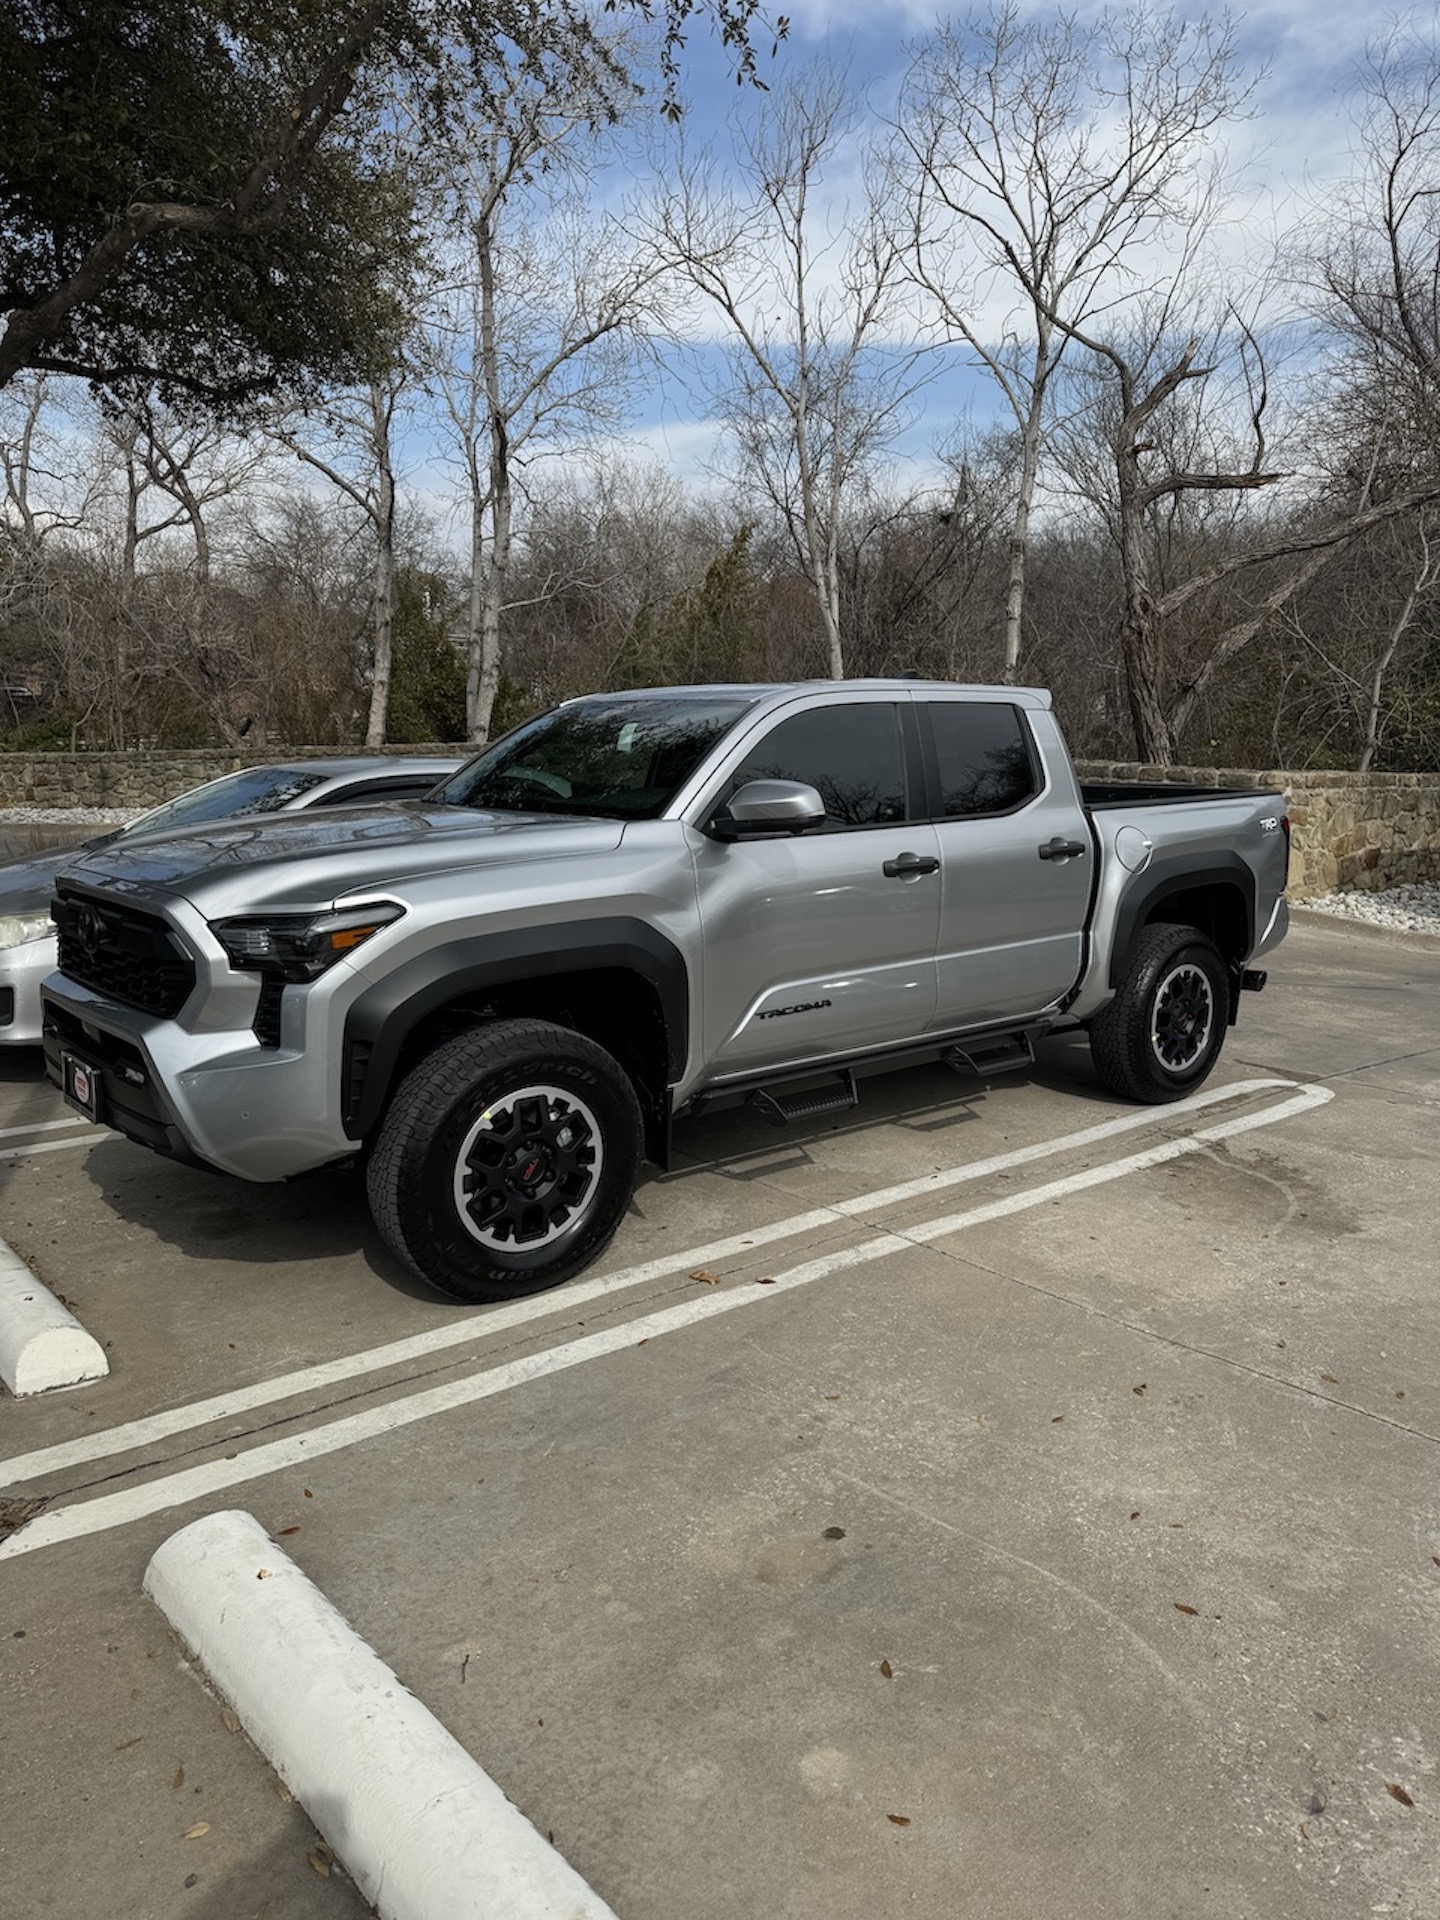 2024 Tacoma My favorite 4th gen Tacoma upgrades over the 3rd gen 24Taco1.JPG